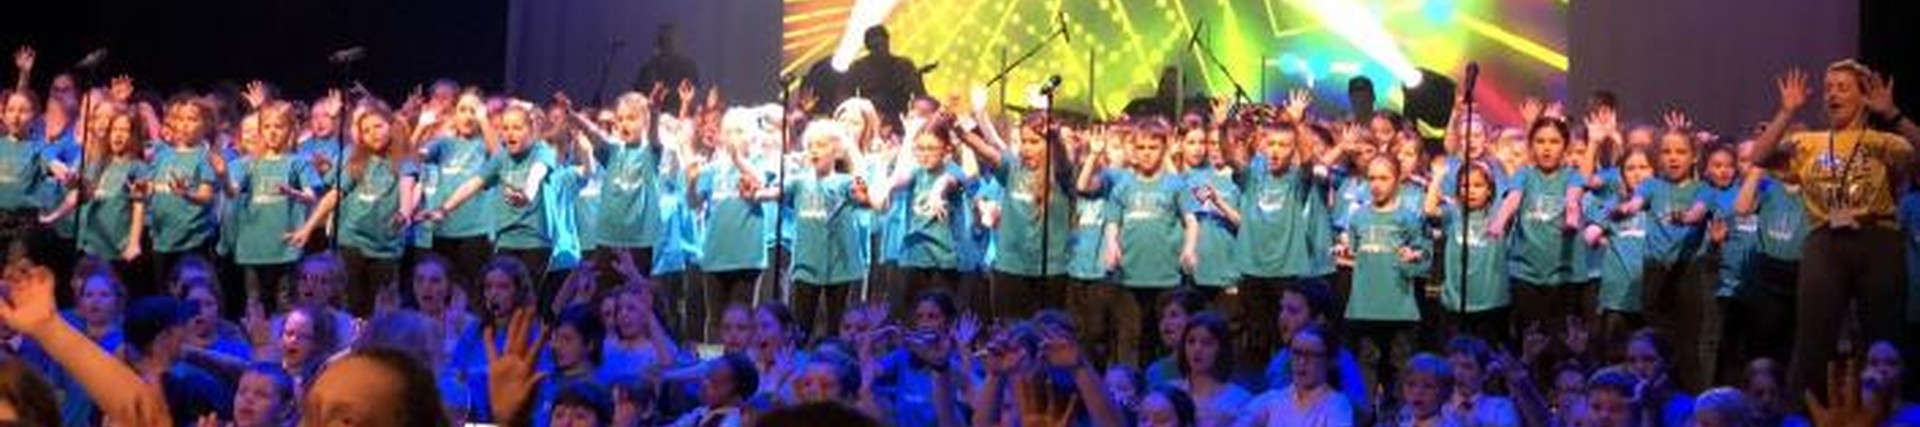 Children singing on stage in a concert